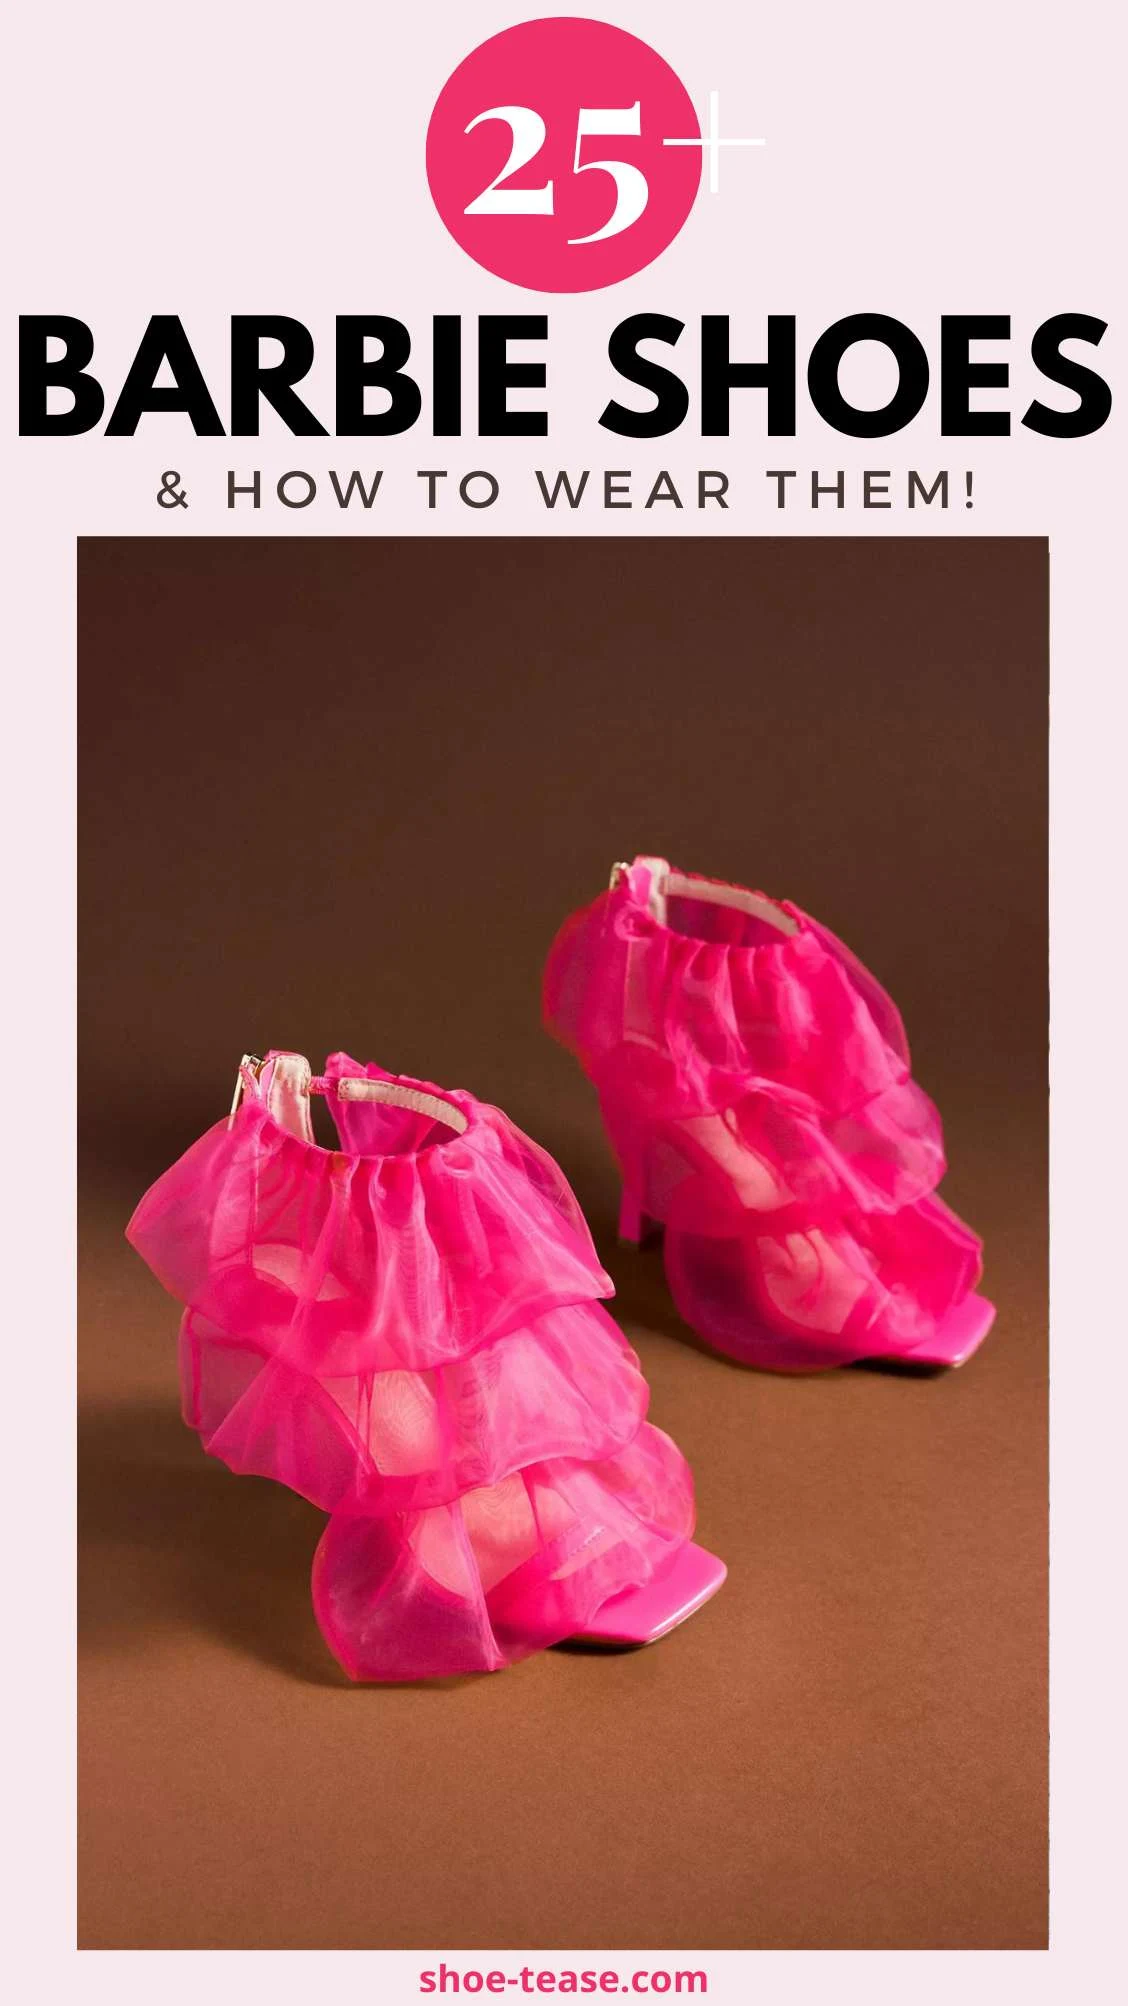 Woman wearing barbie core fashion shoes under text reading 25 plus barbie shoes and how to wear them.